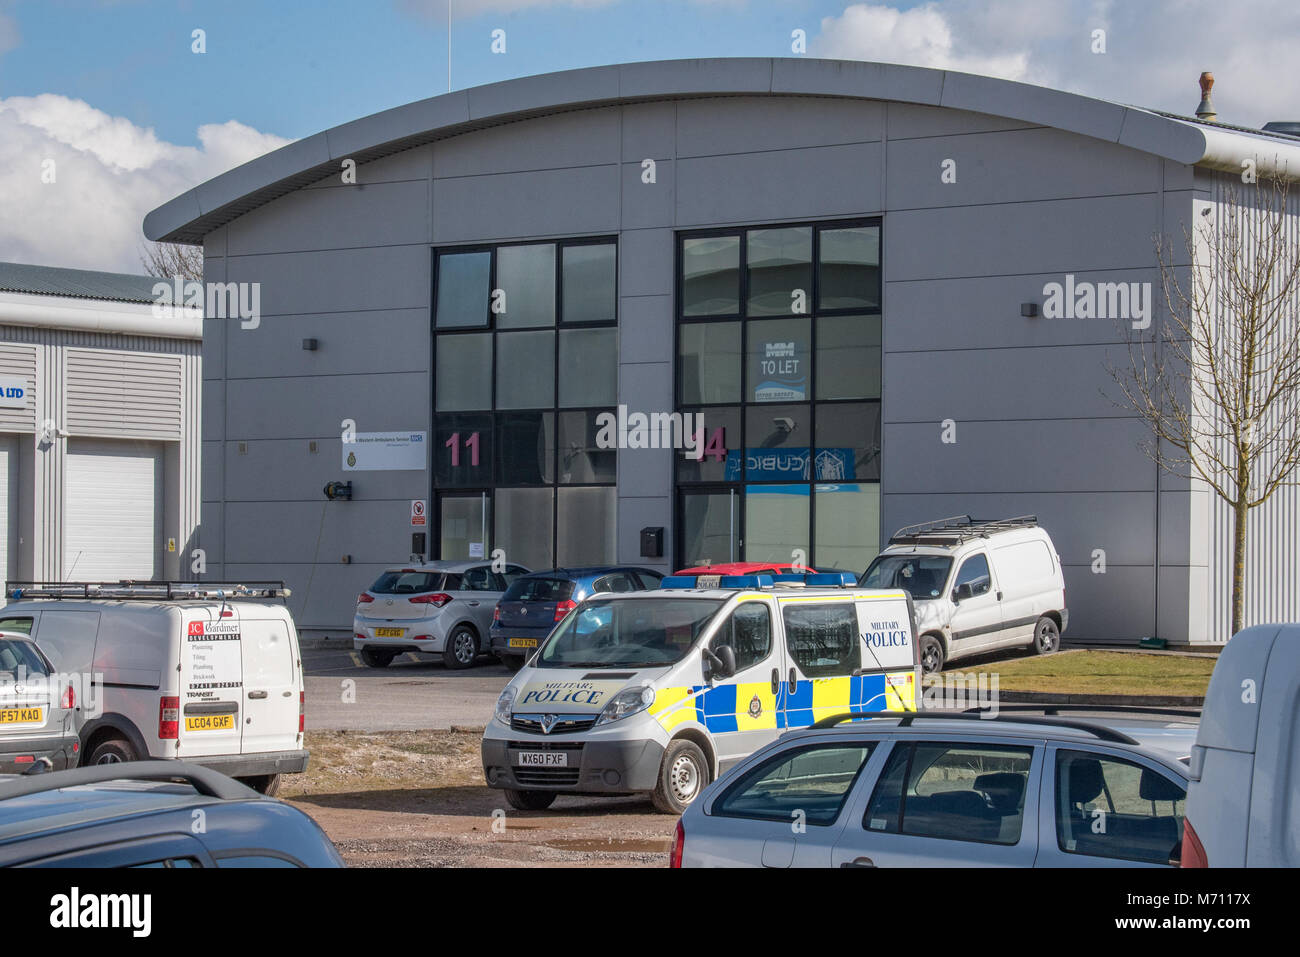 Salisbury, United Kingdom. 7 March 2018. Investigations continue into the suspected poisoning of a former Russian double agent and his daughter. A cordon remained in place at a ambulance station at Solstice Park in Amesbury.   Credit: Peter Manning/Alamy Live News Stock Photo